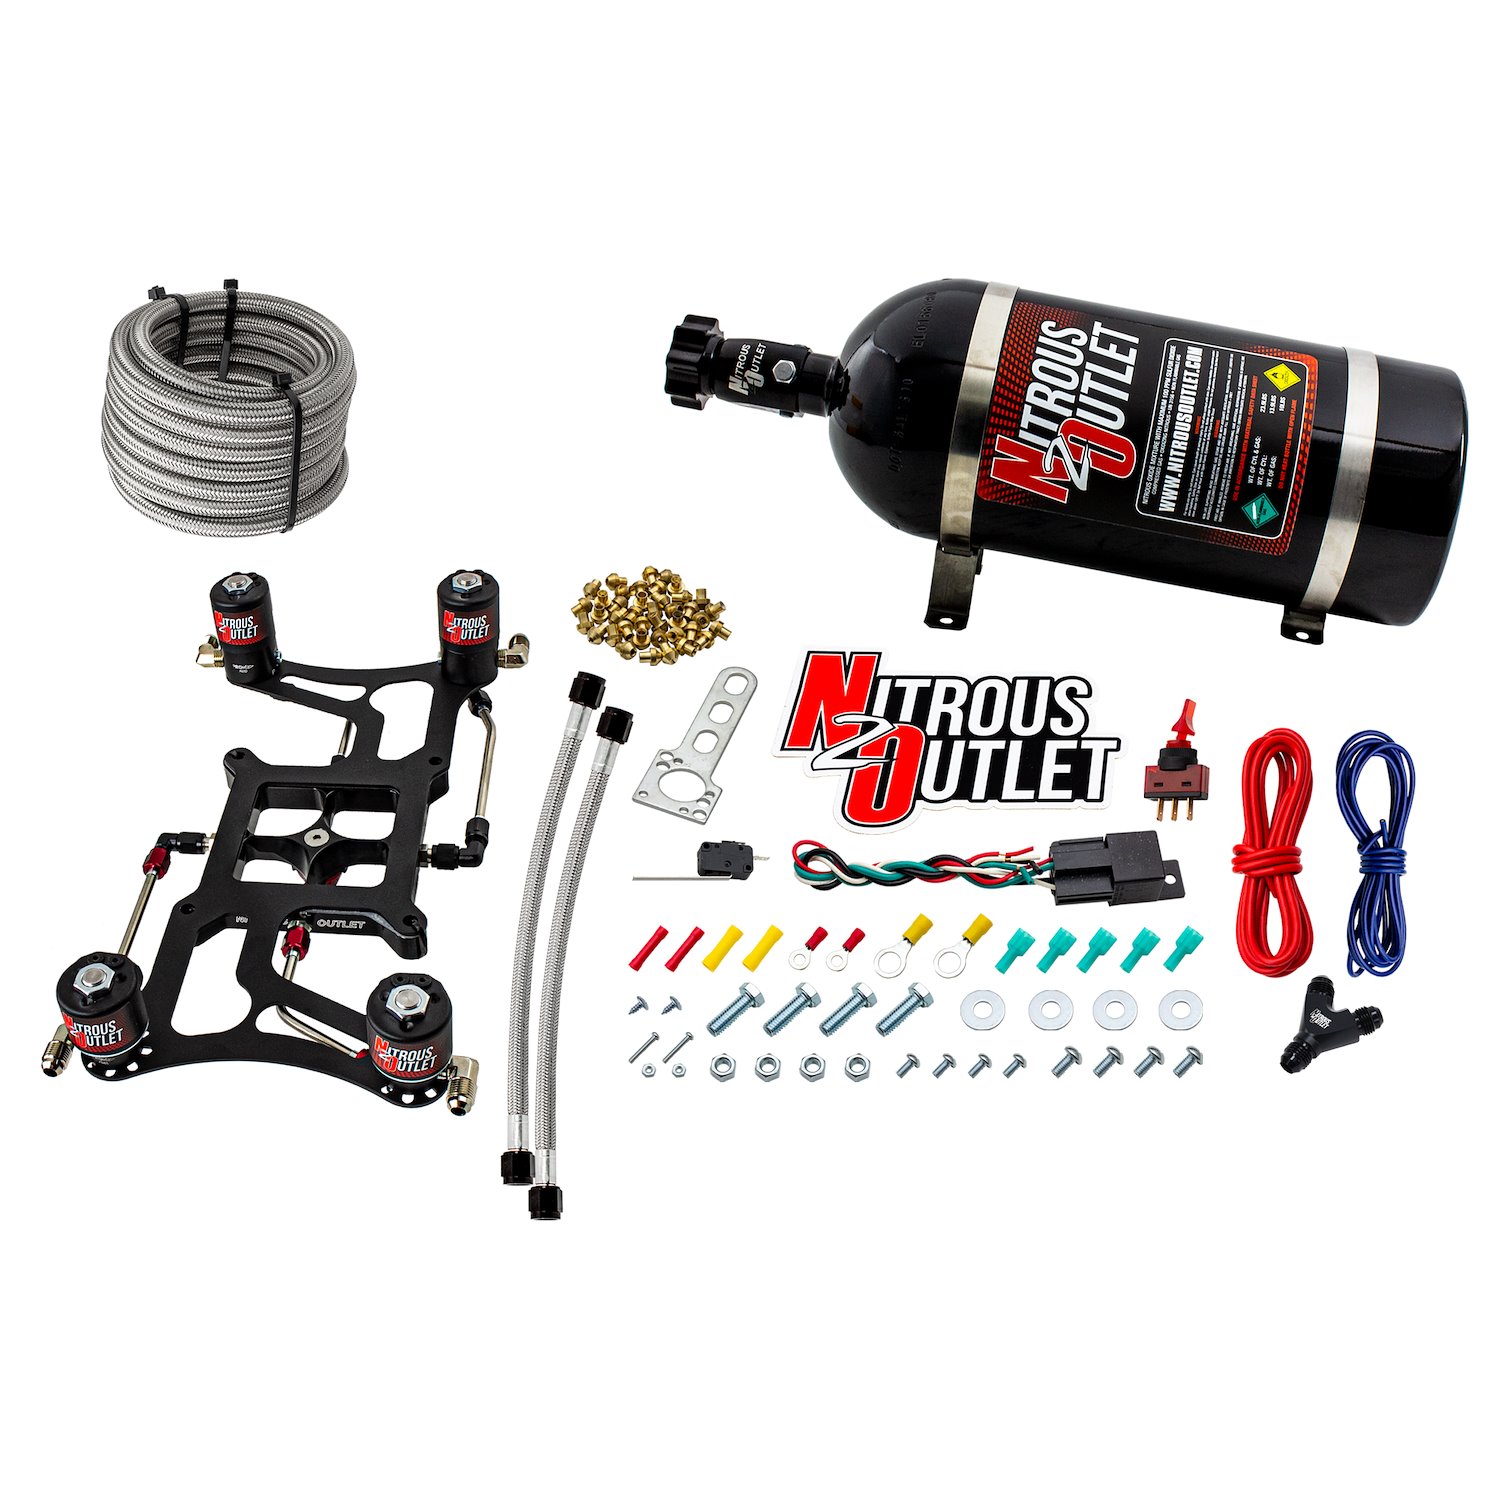 00-10628-10 4150 Hornet 2 Race Dual-Stage System, Hard-Line